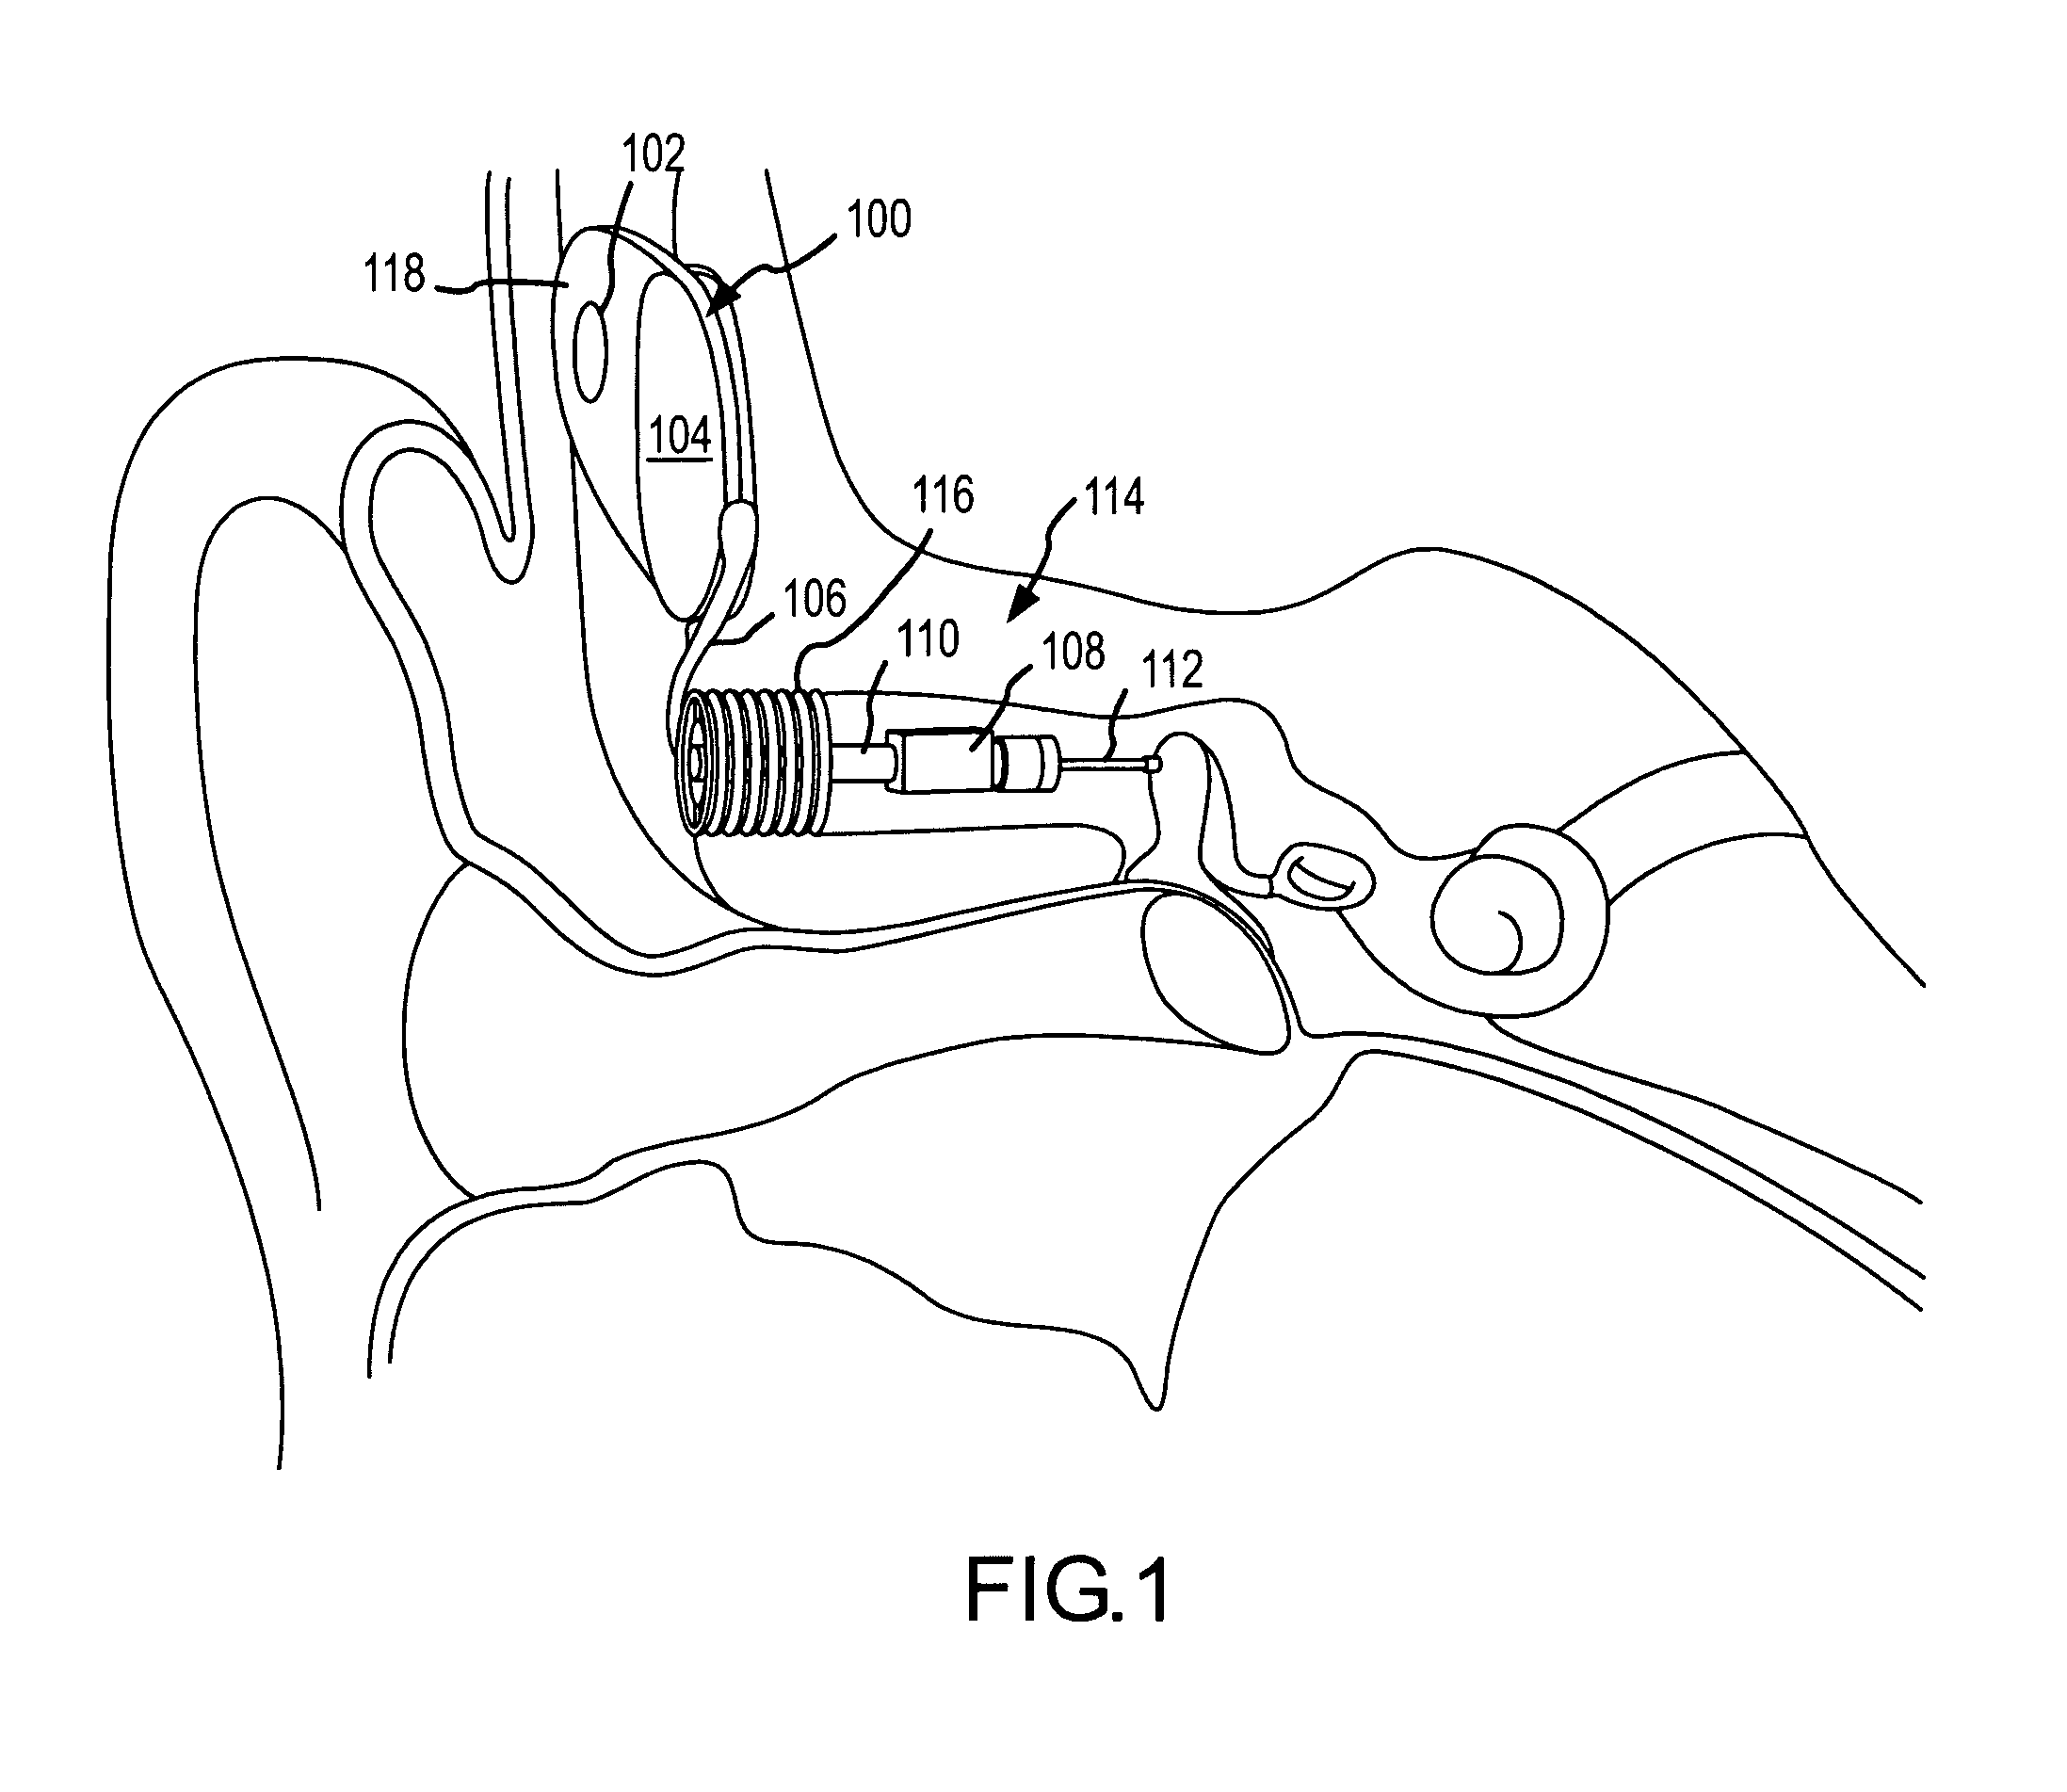 Electrophysiological measurement method and system for positioning an implantable, hearing instrument transducer